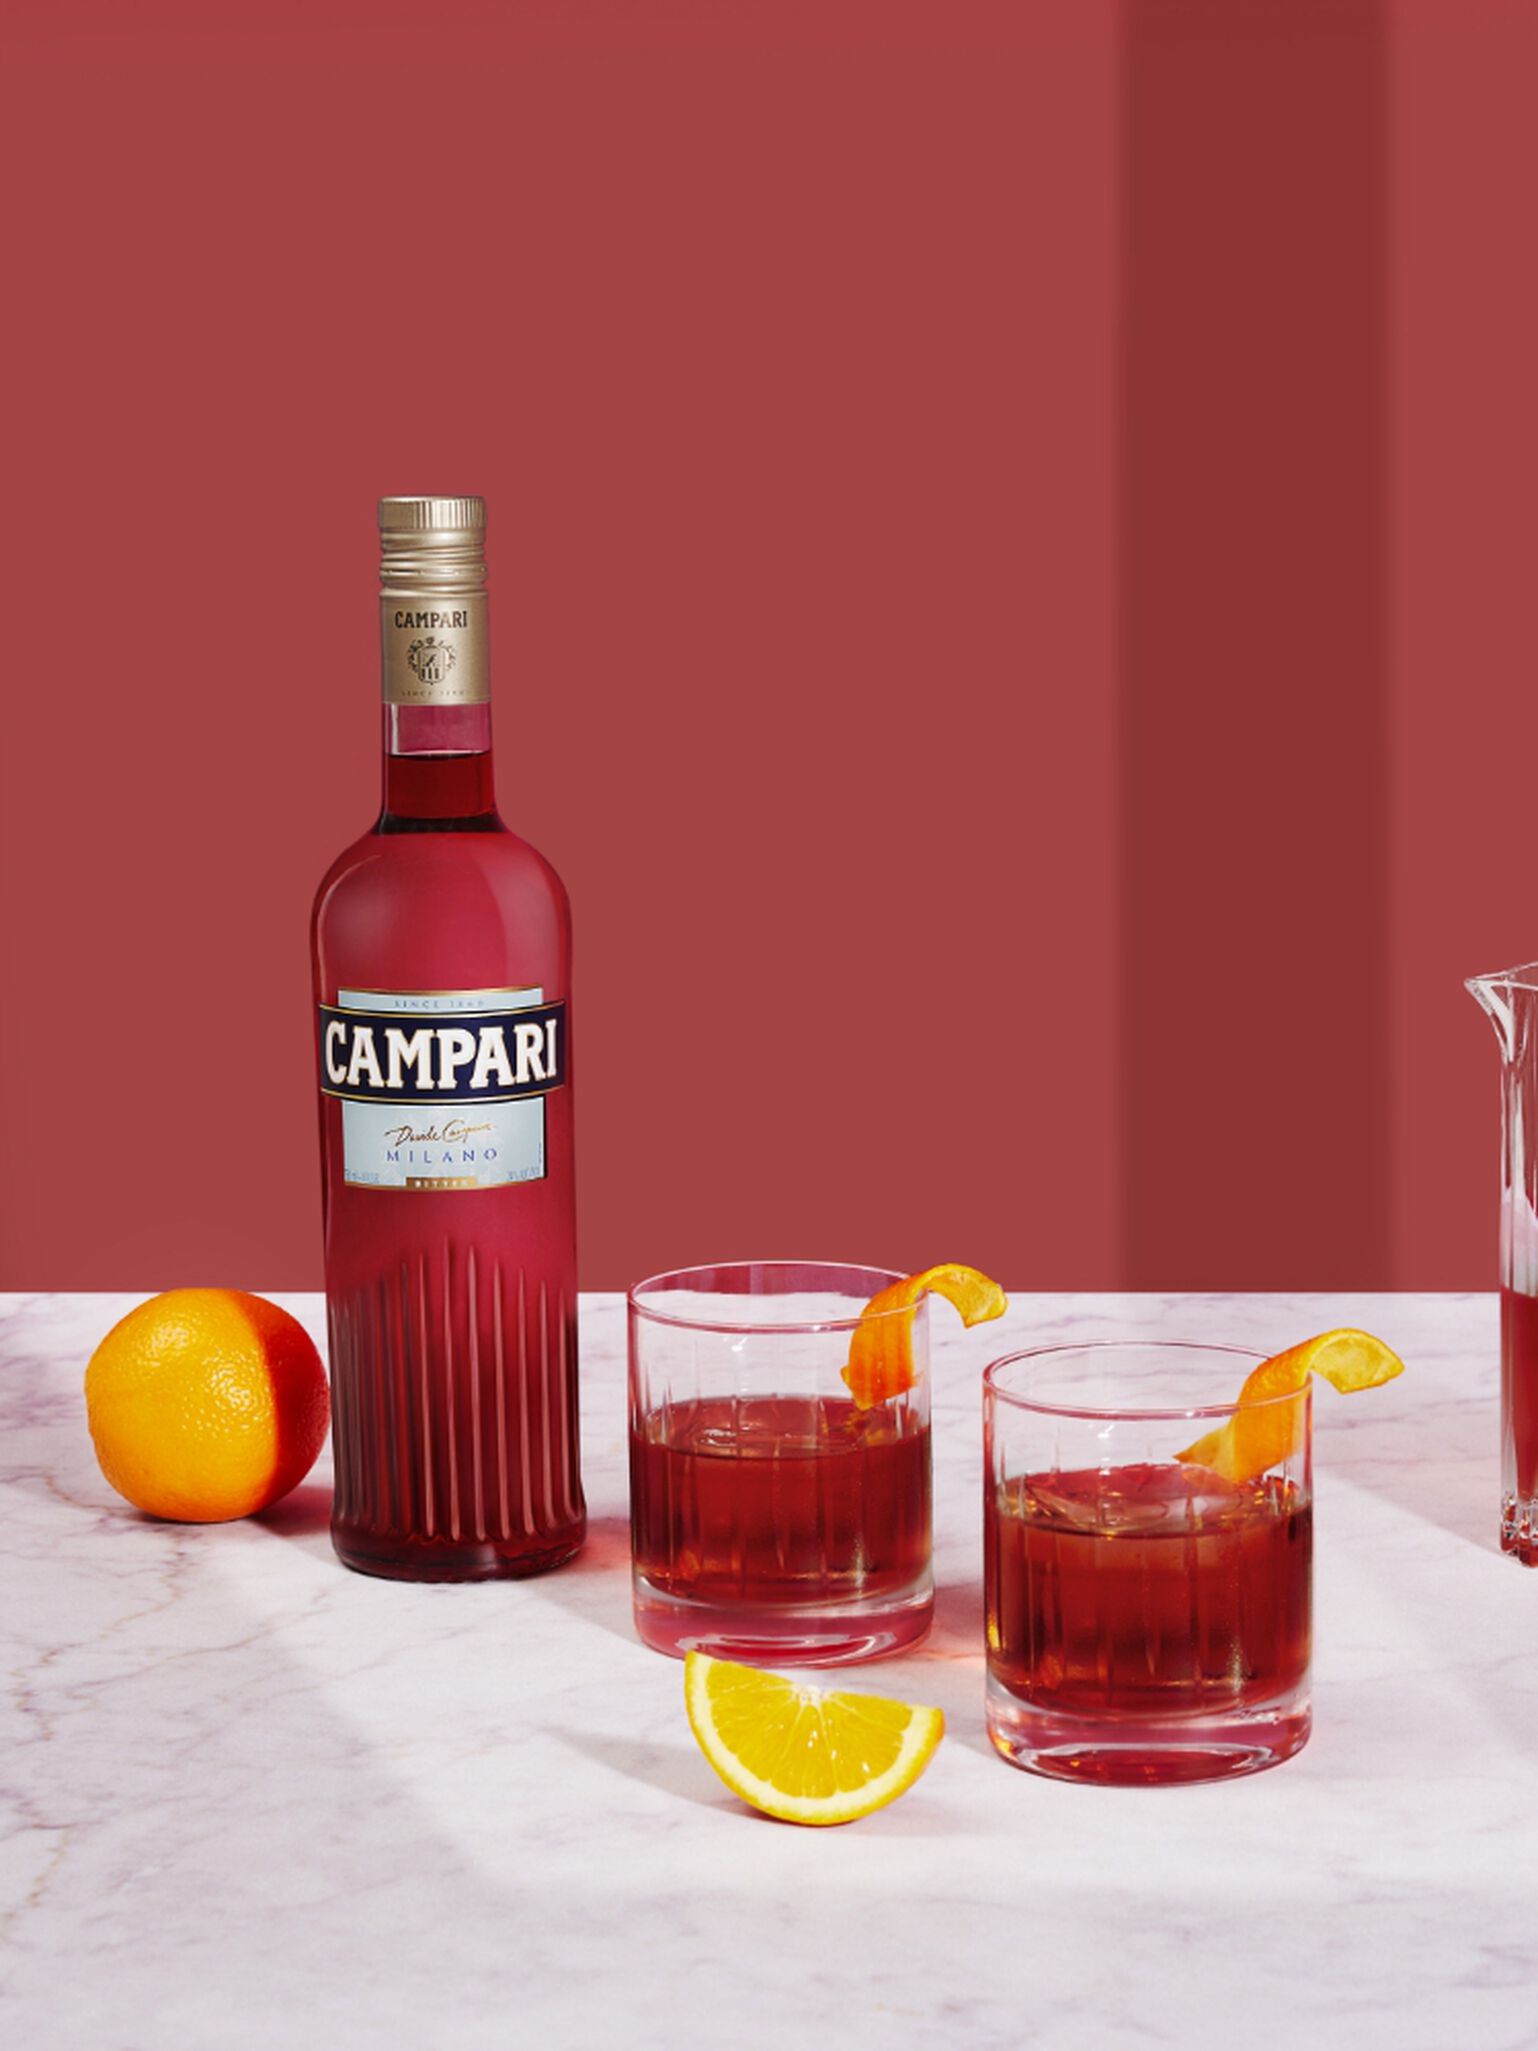 A bottle of Campari with cocktails